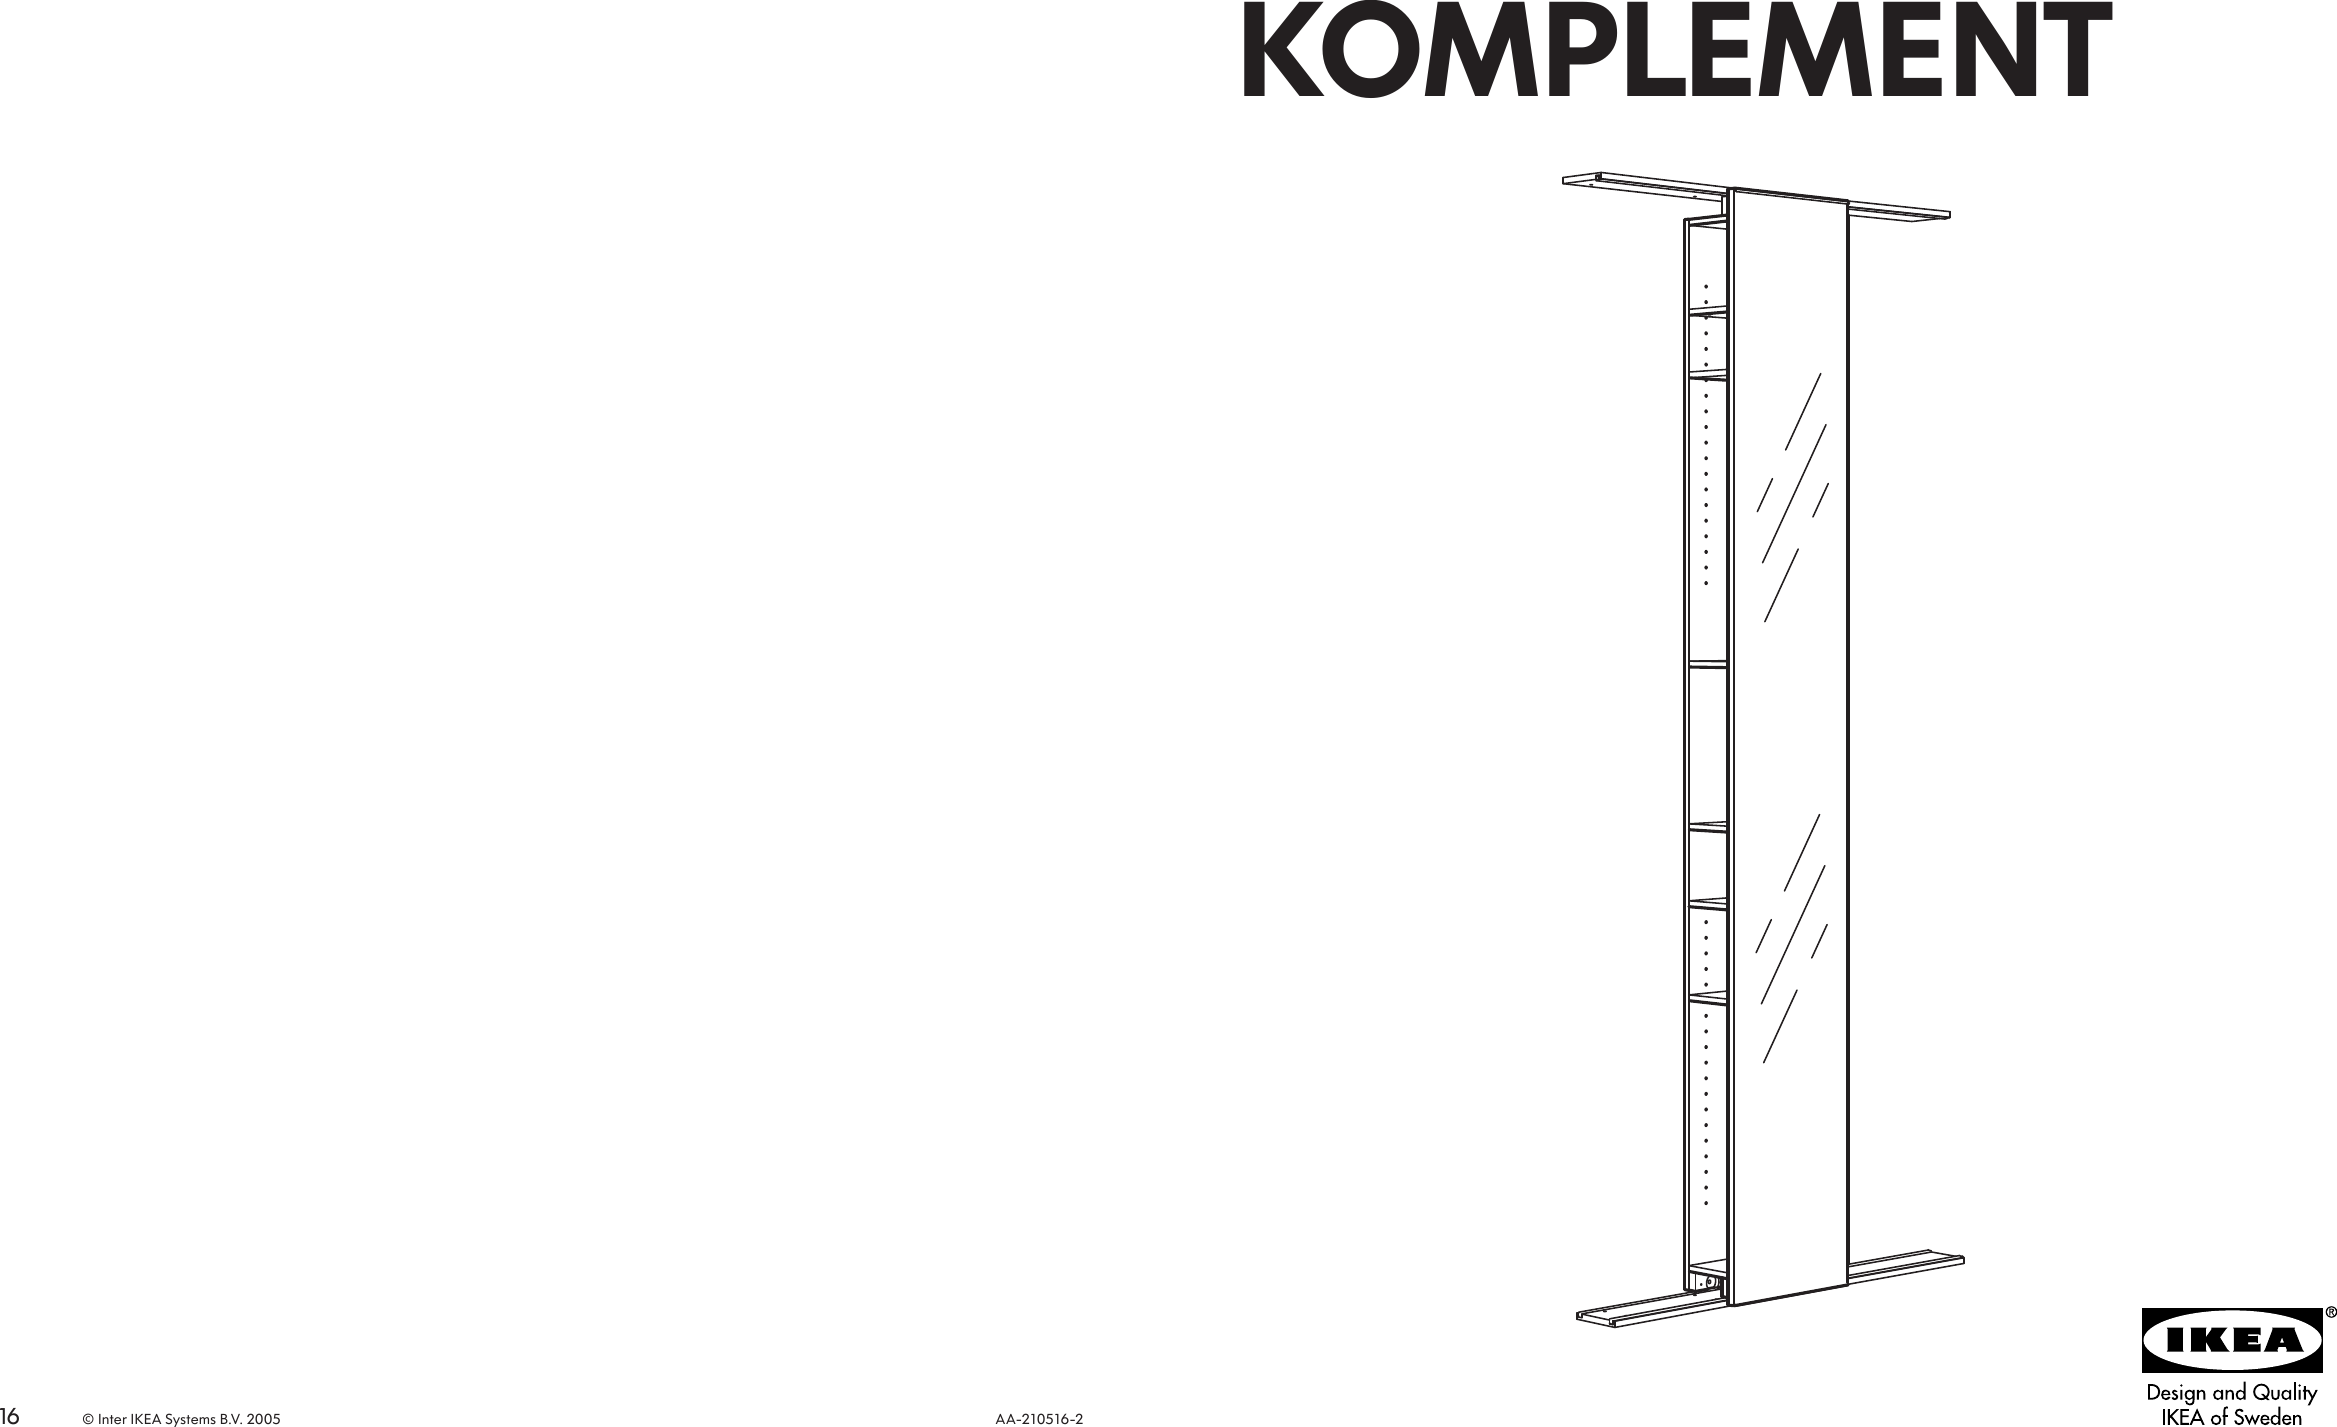 Page 1 of 8 - Ikea Ikea-Komplement-Mirrored-Storage-Unit-92-7-8-Assembly-Instruction